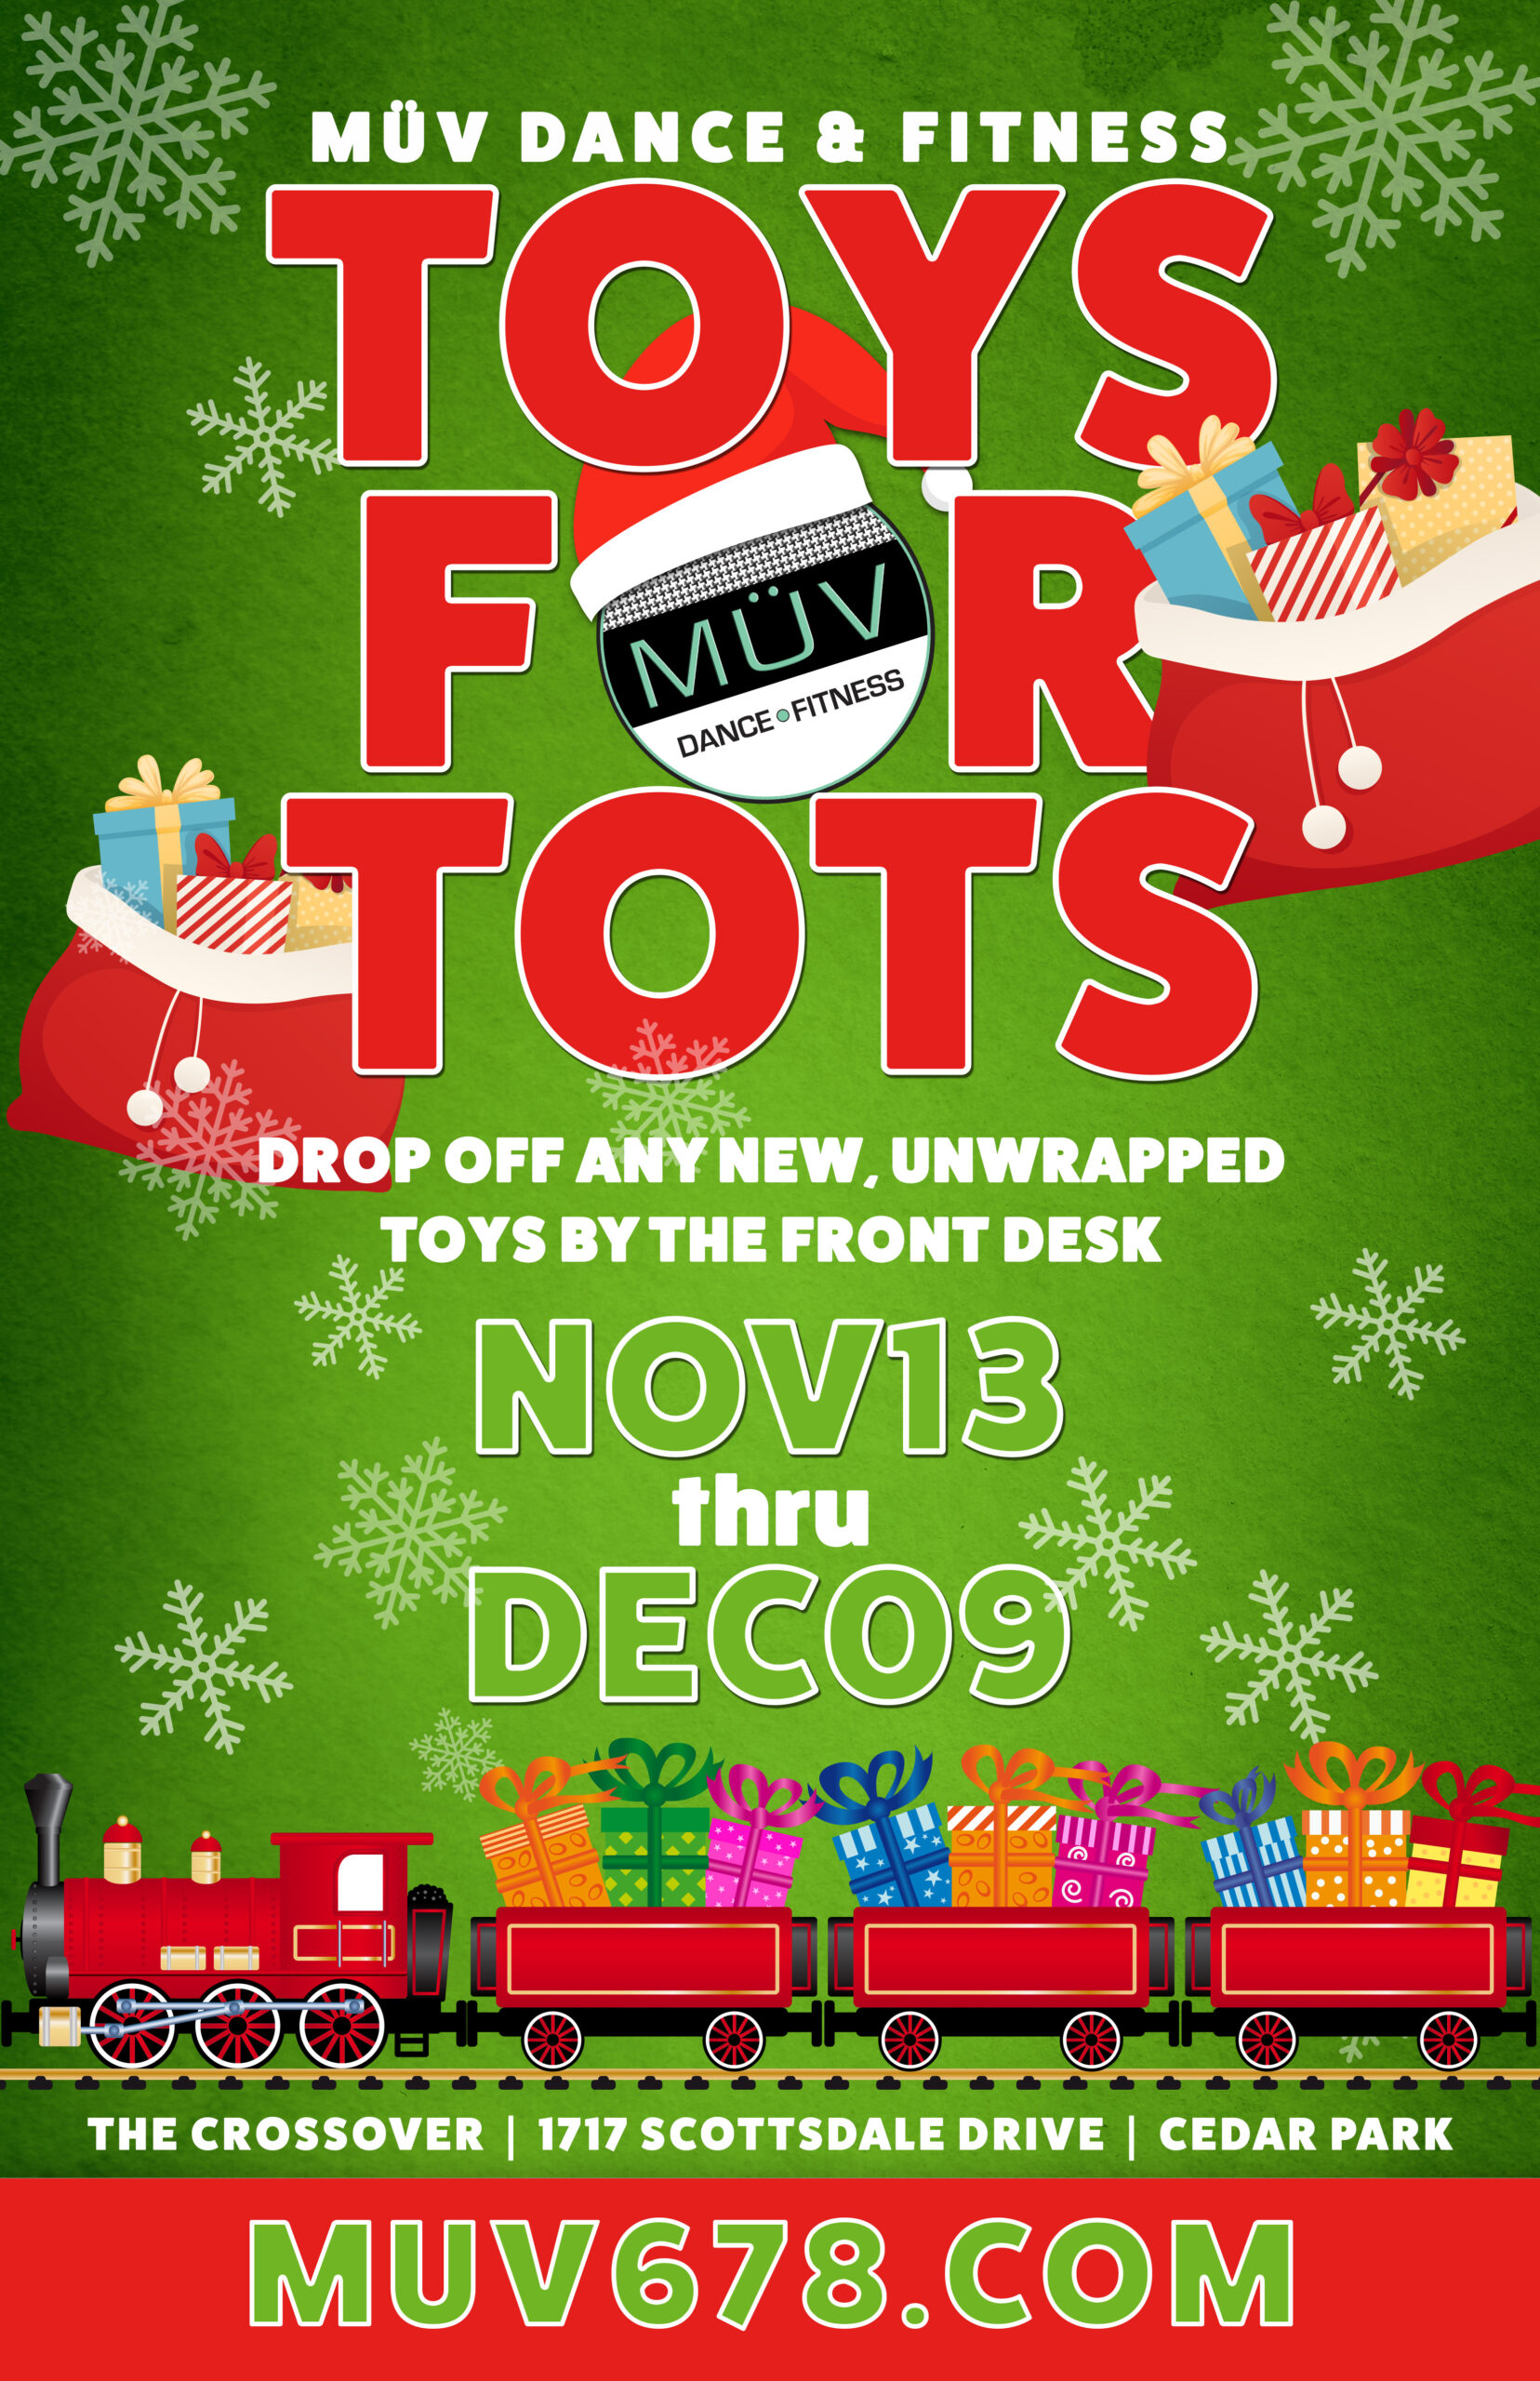 Toys For Tots Müv Dance Fitness